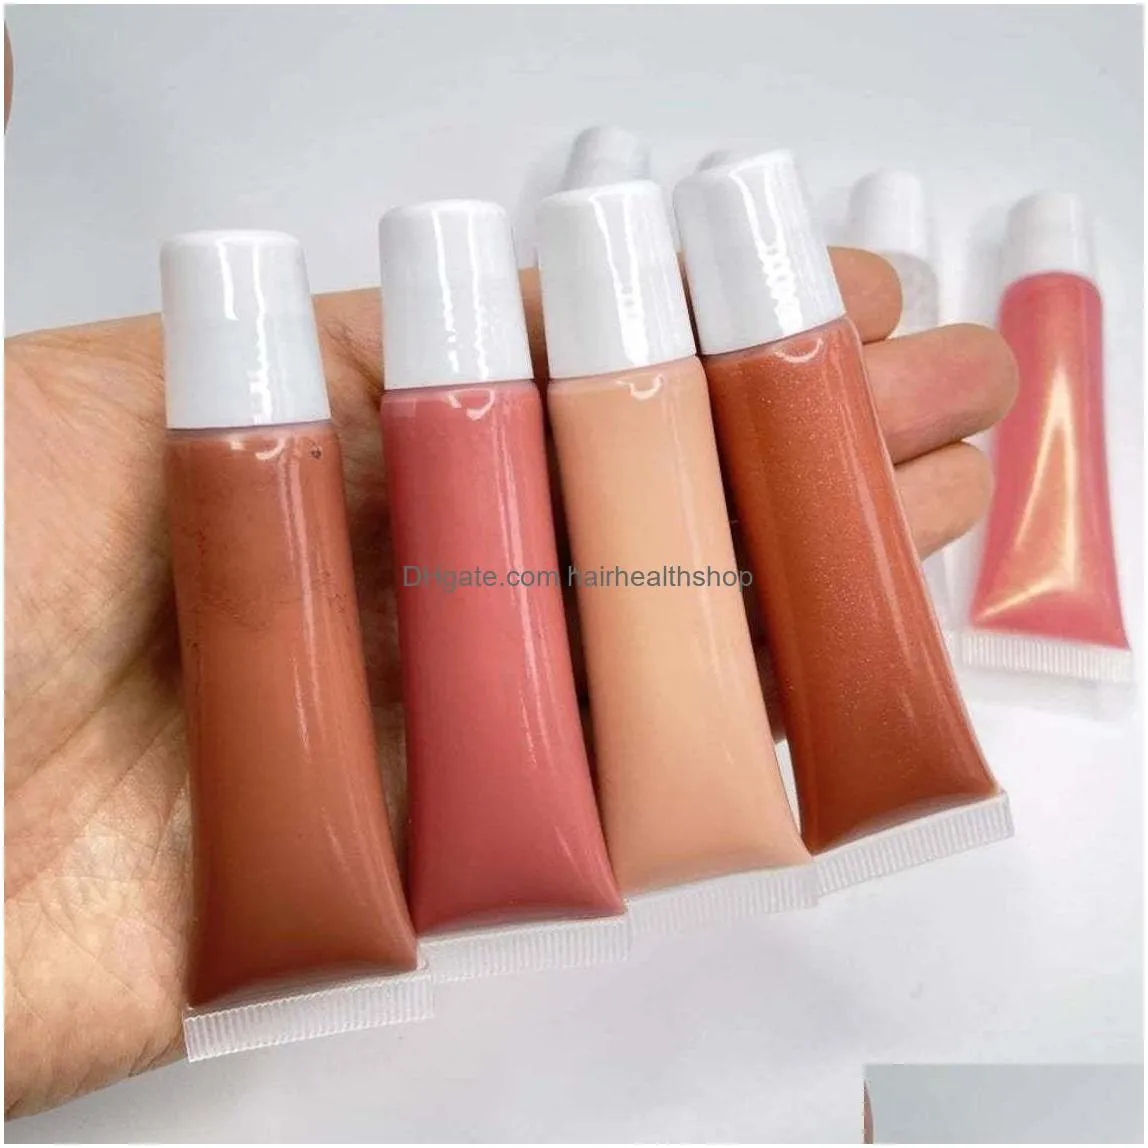 Lipstick Lipstick Pre-Made Lip Gloss Nude Colors Pigmented Wholesale Private Label Printed On Package 15Ml Squeeze Tube Vegan Cruelty Dhf4X